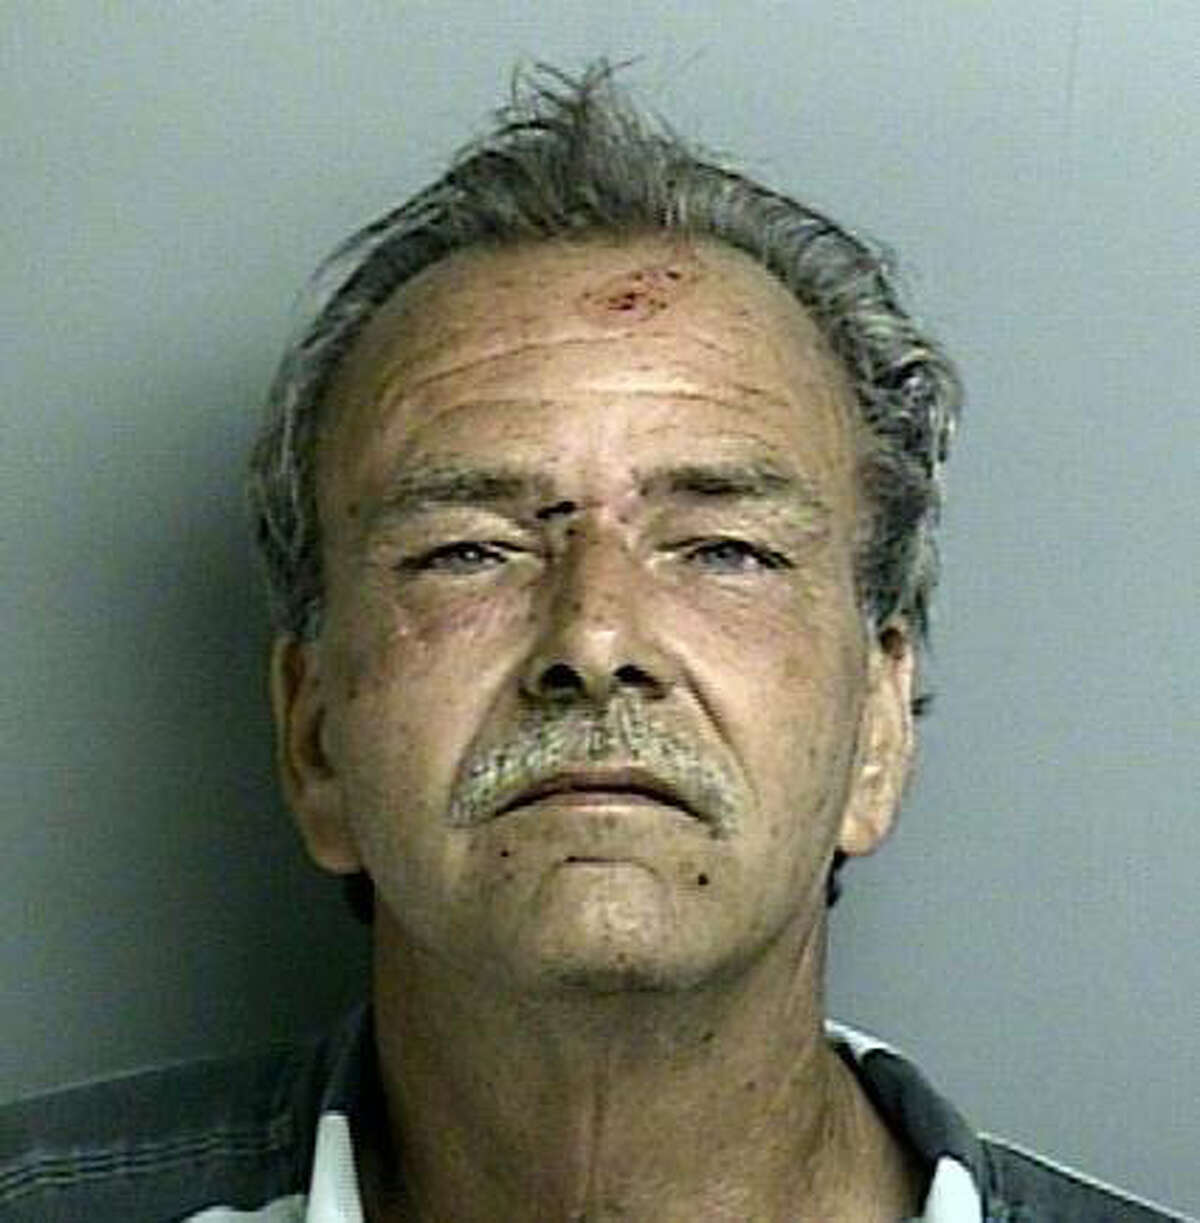 Donald Middleton, 56, of Houston was sentenced by a Montgomery County judge on June 6, 2016, to life in prison for a DWI conviction stemming from an incident on Memorial Day 2015. It was the man's ninth DWI conviction, and he won't be eligible for parole for 30 years. Middleton registered a blood alcohol content of more than twice the legal limit after his vehicle struck a car driven by a teenager, who was not injured. The judge found Middleton had used his vehicle as a deadly weapon.